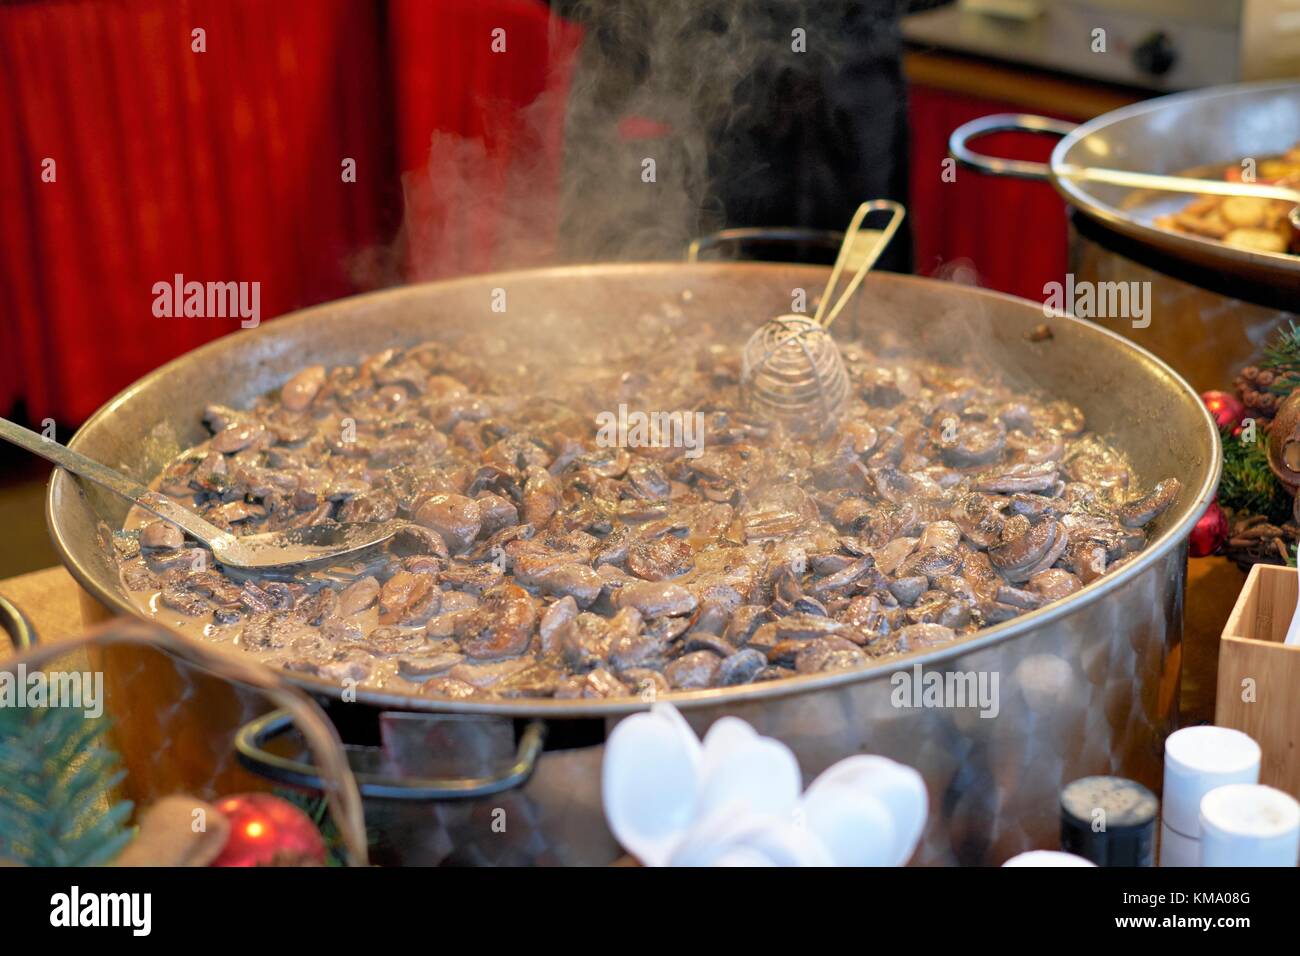 Mushrooms cooking in a large pan, Nottingham Christmas Market 2017 Stock Photo